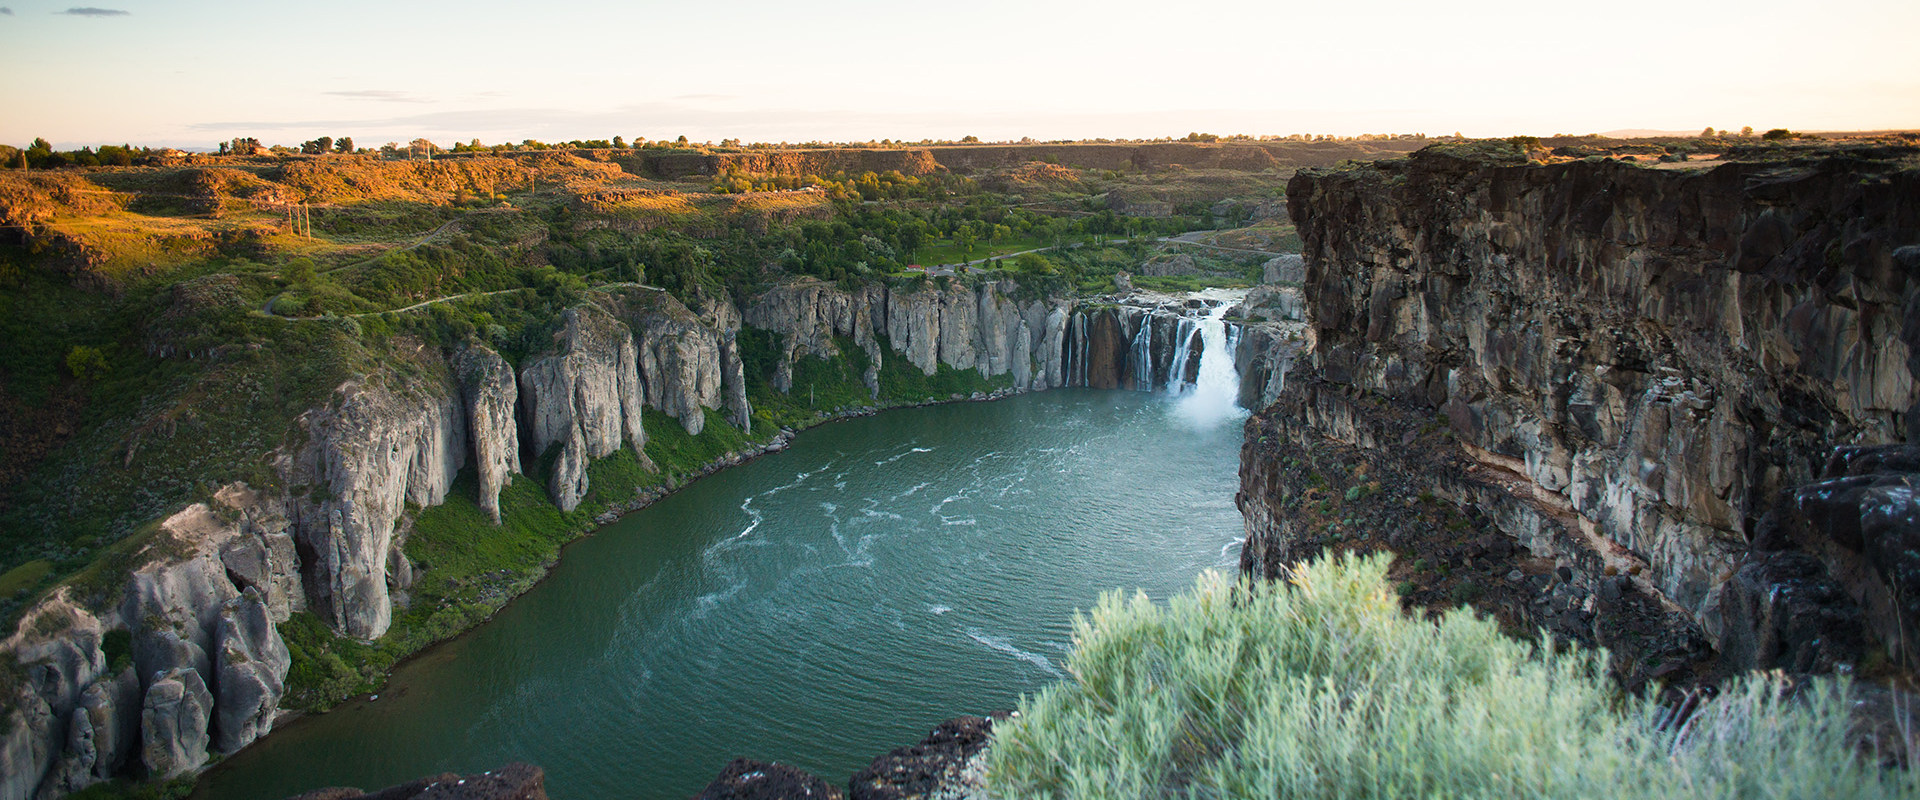 Non-Renewable Technologies: Generating Electricity and Natural Gas in Post Falls, Idaho